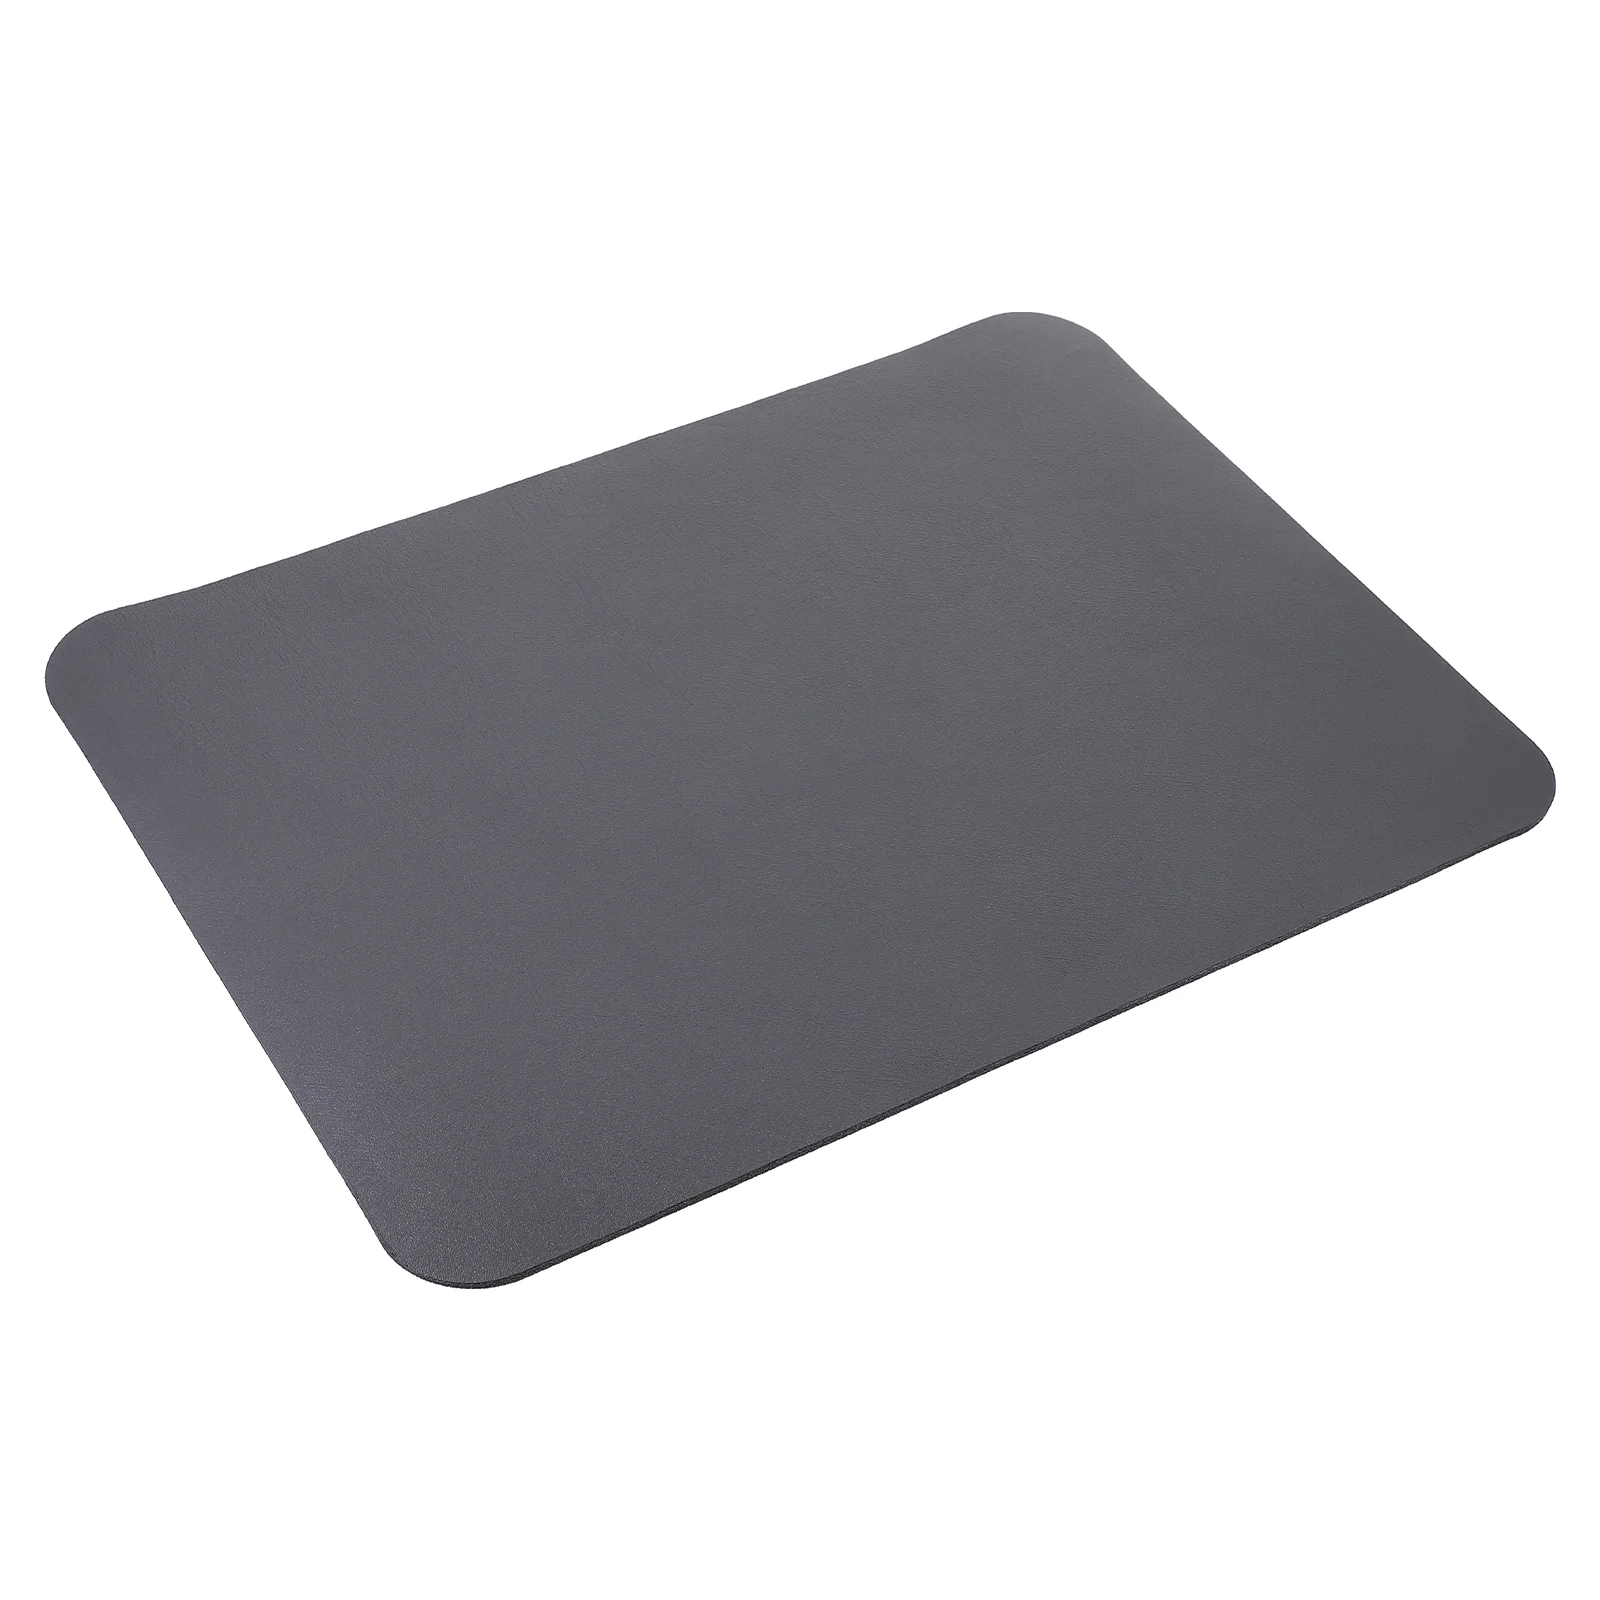 

Decor Kitchen Counter Mat Drying Mats For Countertop Dishes Multipurpose Pad Diatomite Water Absorbing Draining Cushion